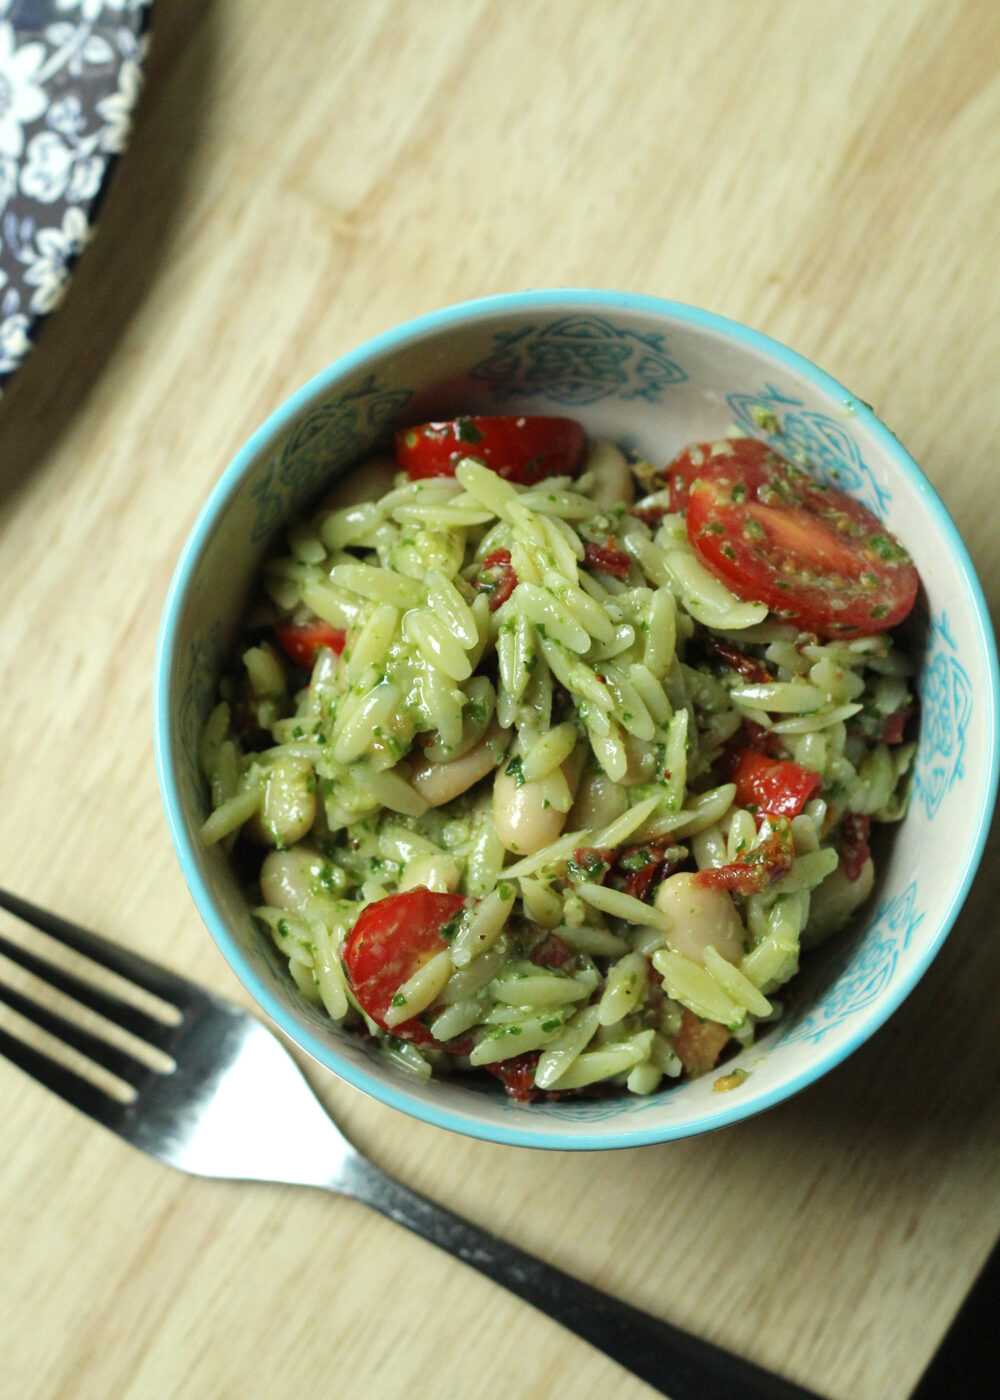 A light blue and white patterned bowl holds an oblong orzo, red tomatoes, and creamy colored beans with a green flecked sauce. 